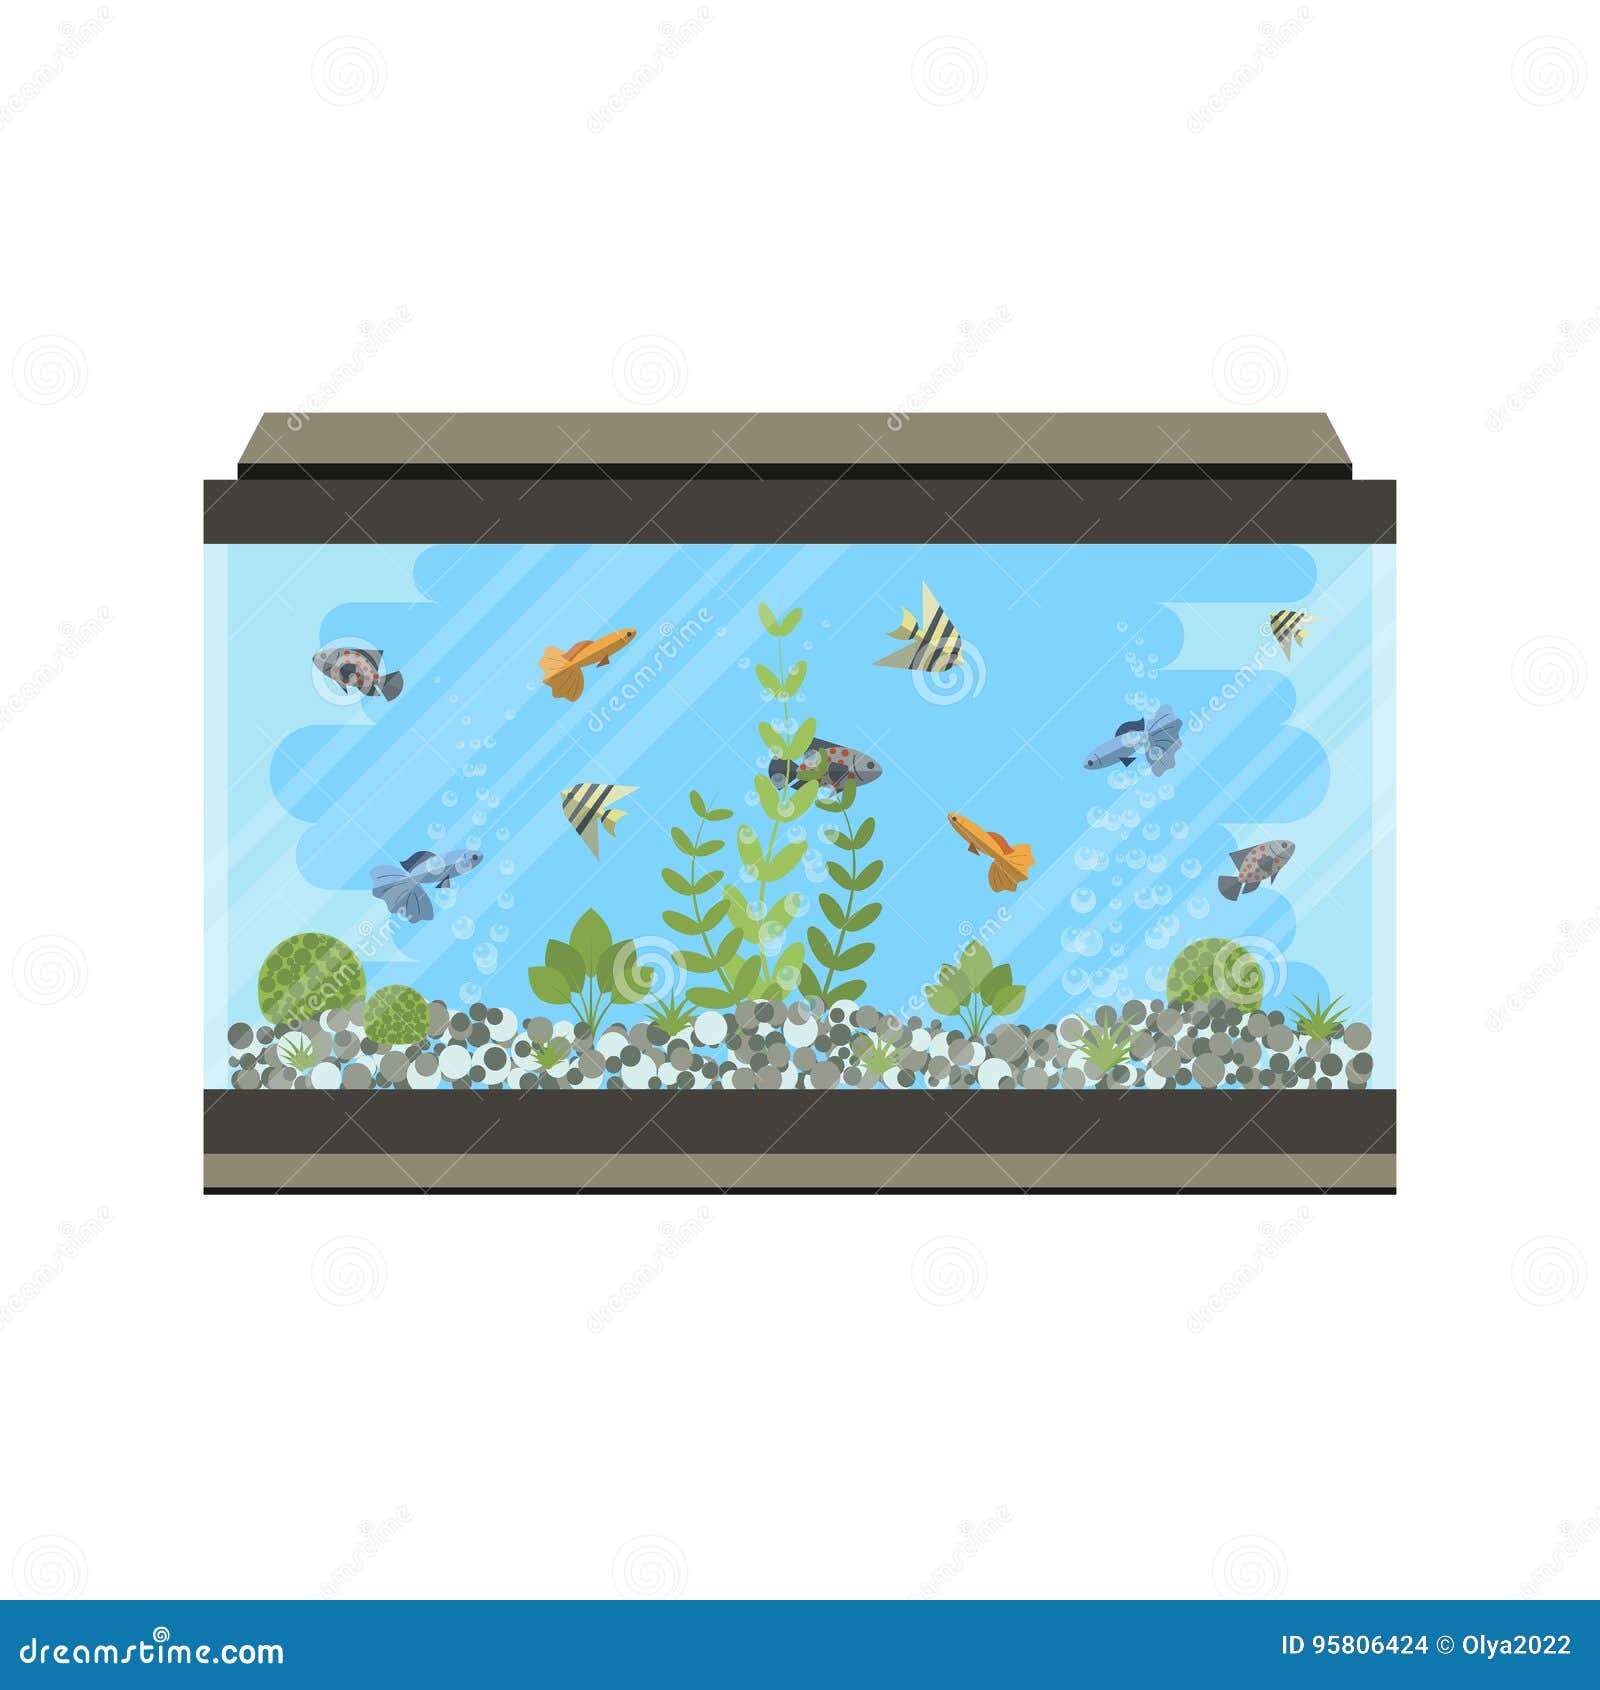 Cartoon Vector Home Aquarium Illustration with Water, Plants and Fish